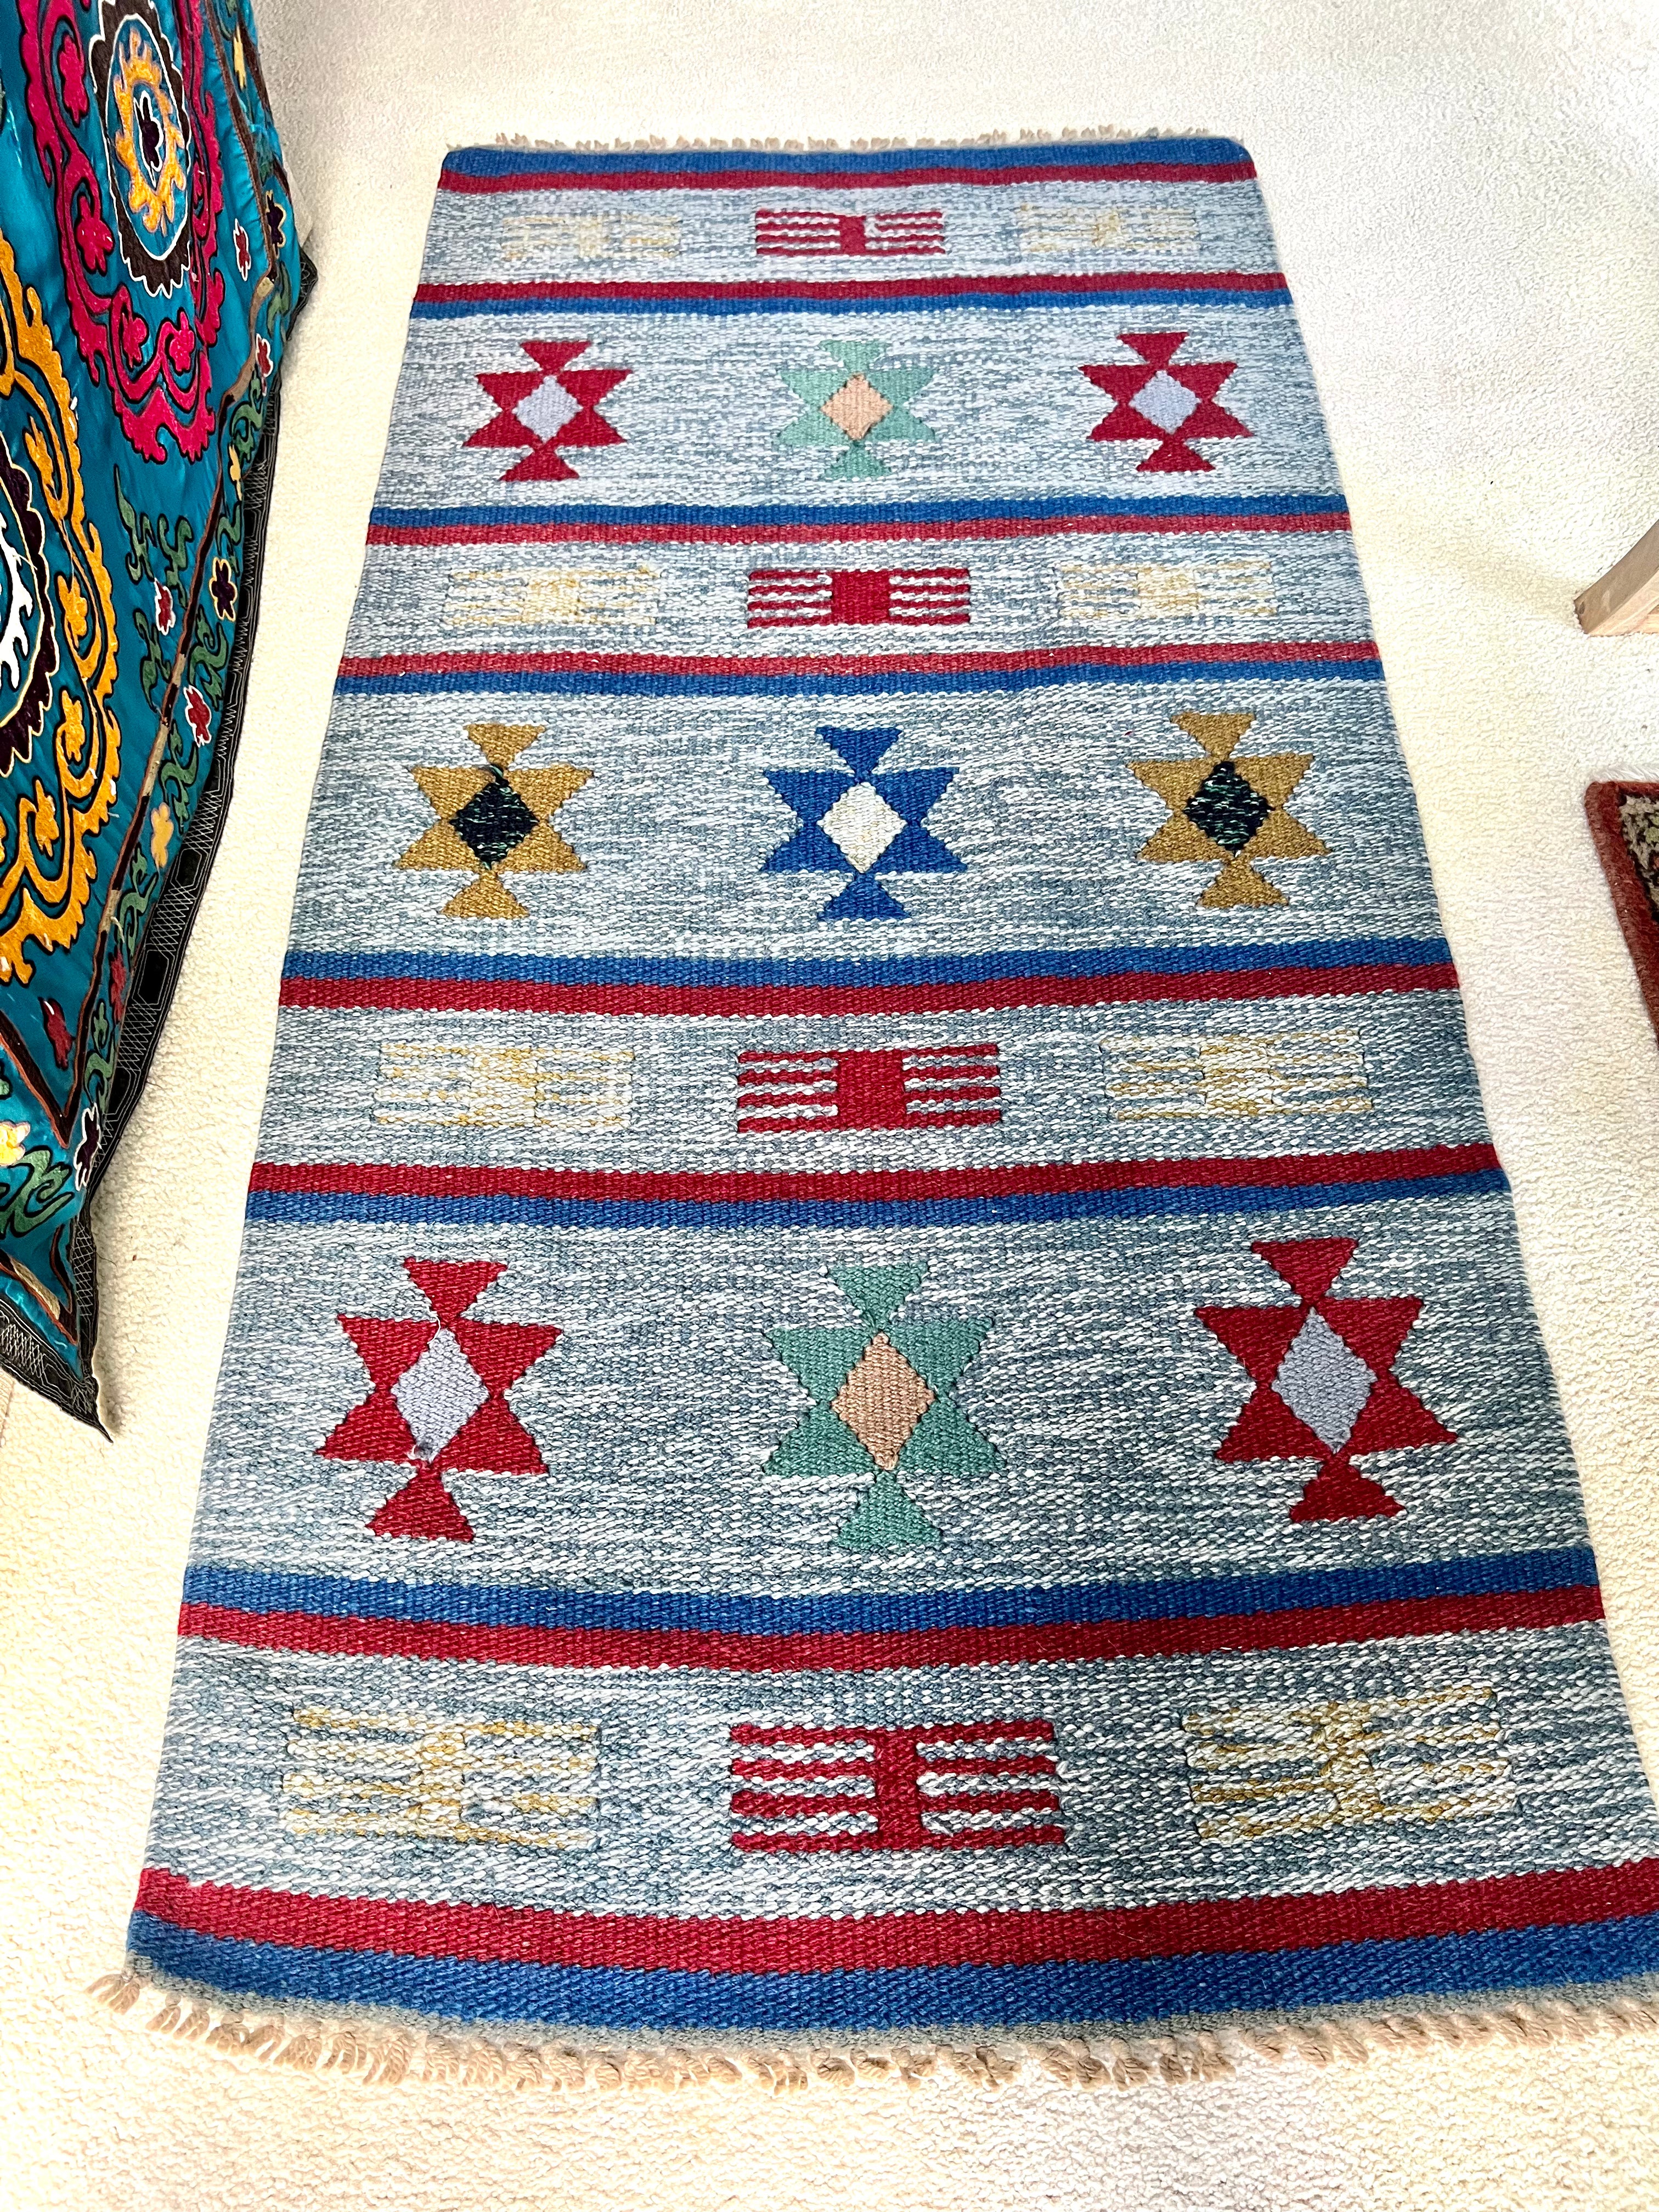 HAND-KNOTTED VINTAGE| South American Kilim|Authentic| Area Rug 5.6 x 2.9 Ft. (Light Blue) - Honorooroo Lifestyle